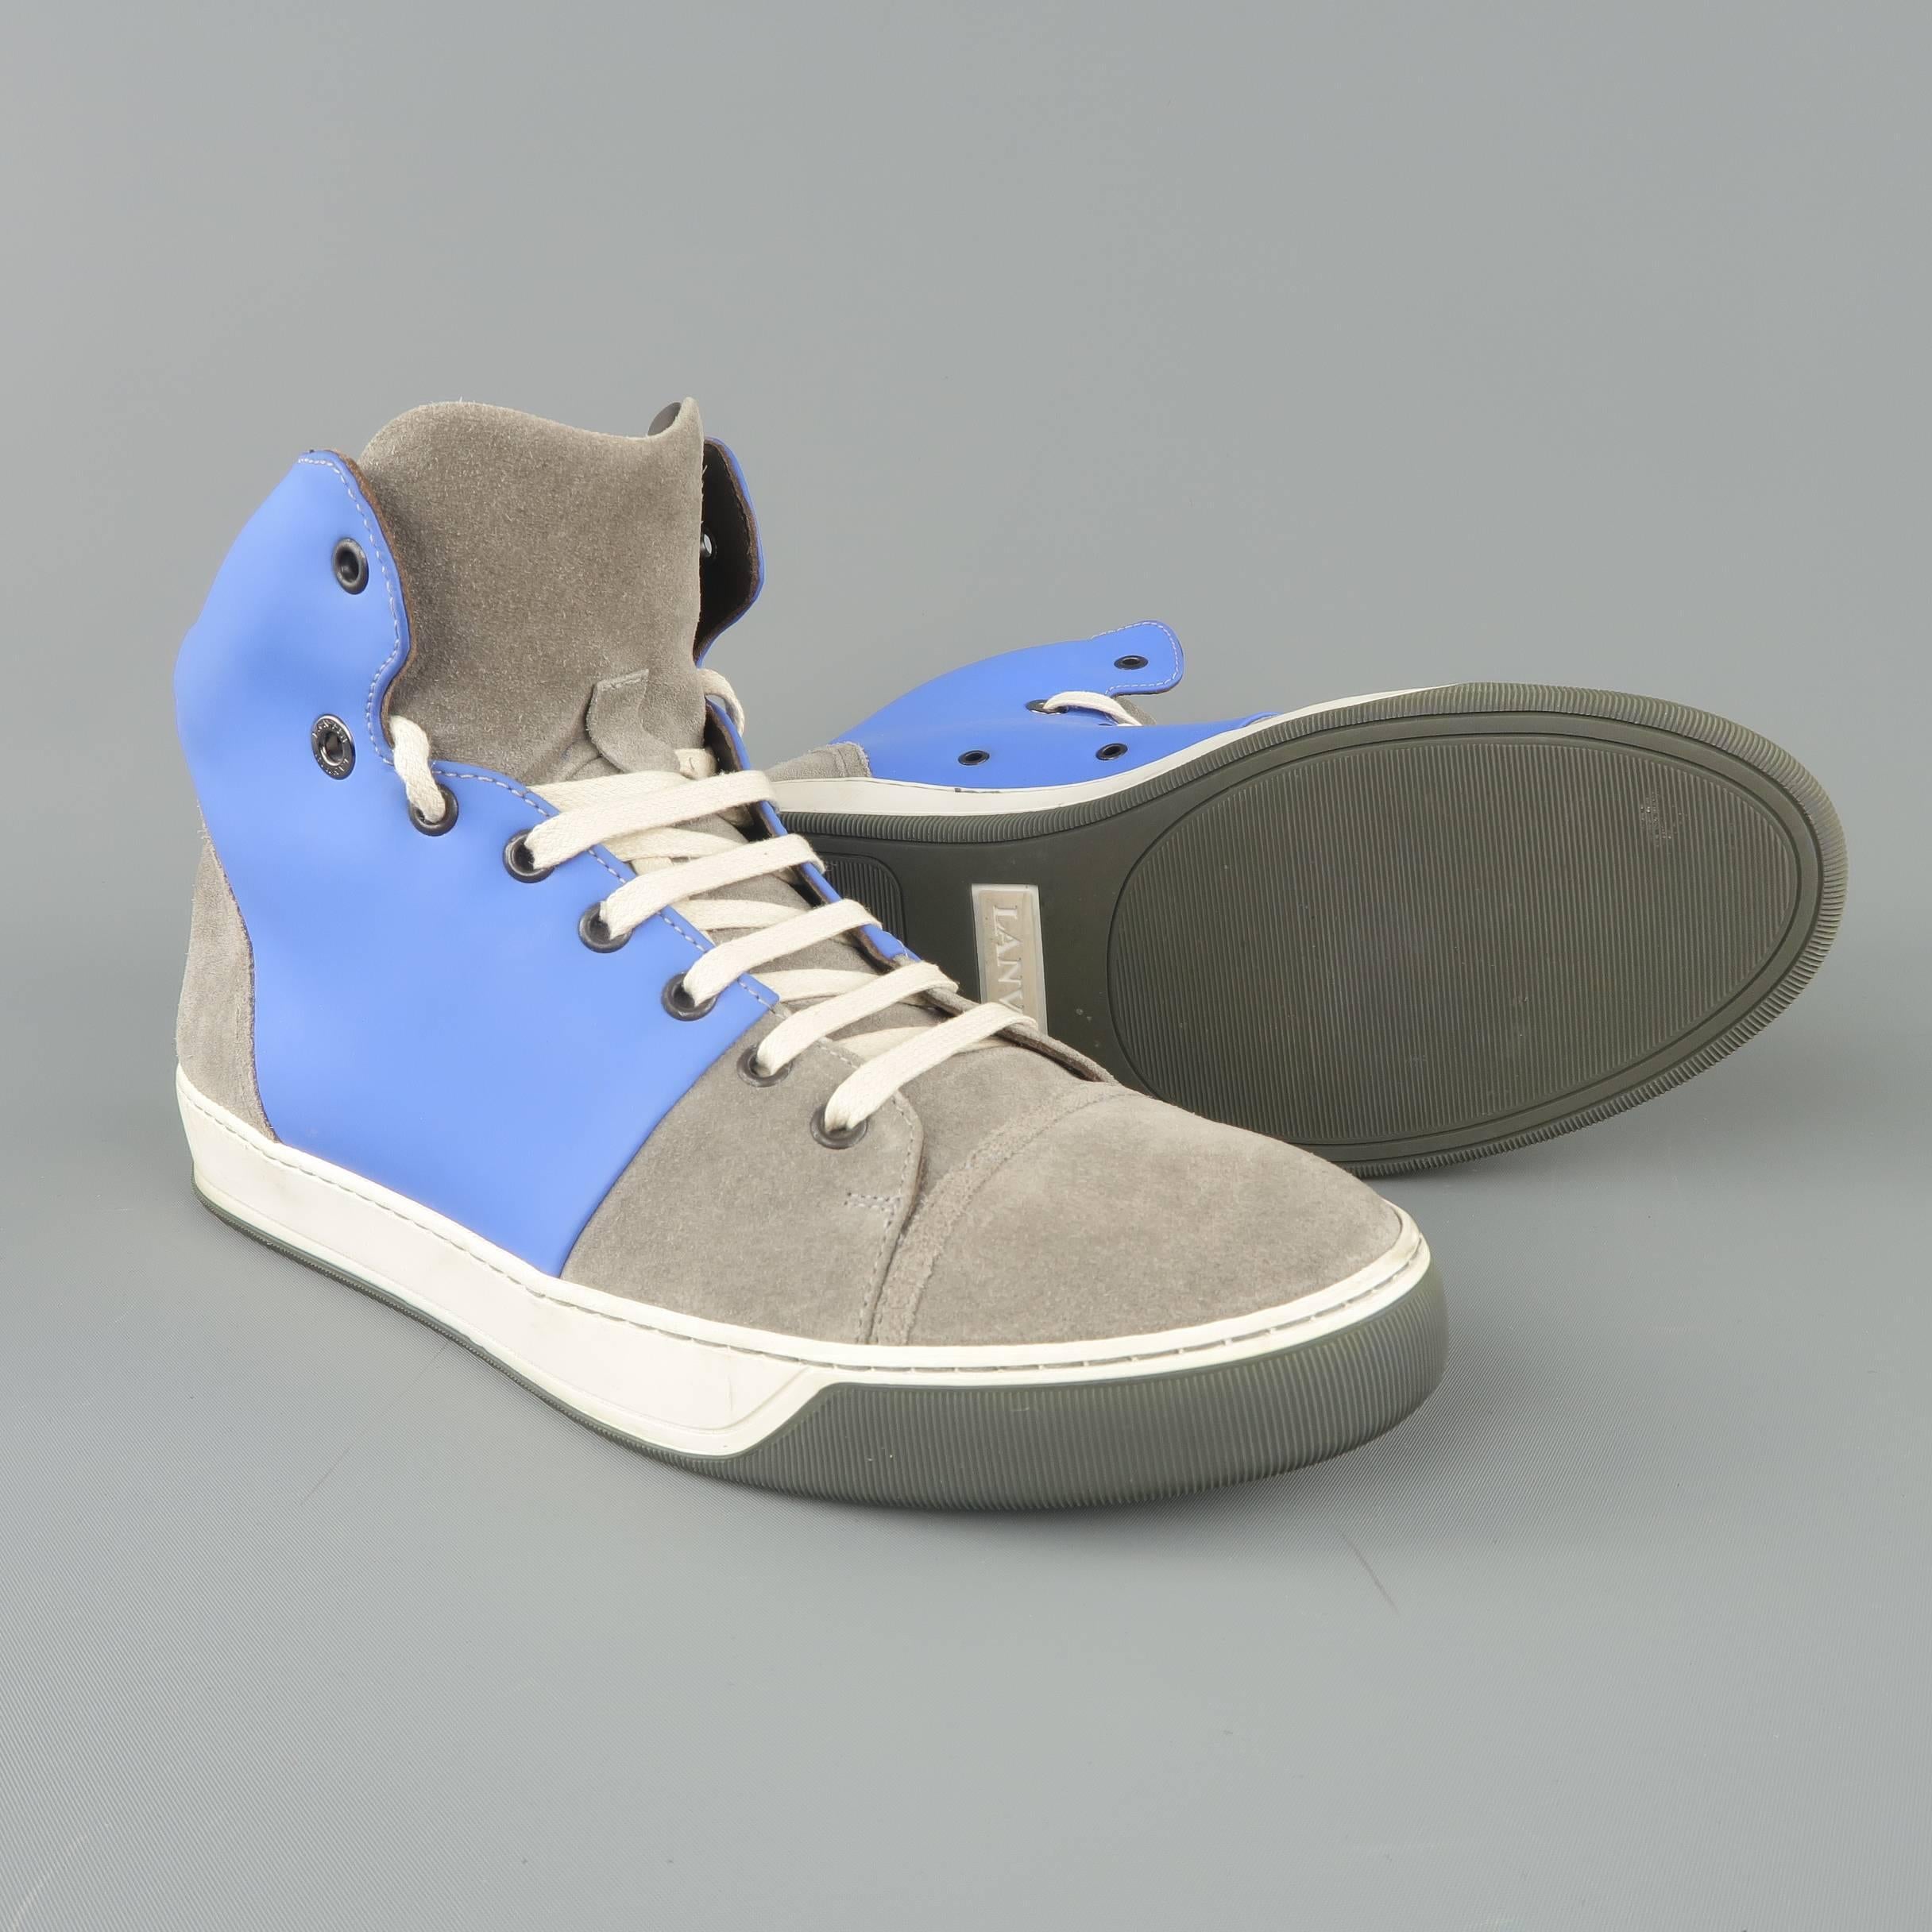 Men's LANVIN Size 8 Grey Suede & Blue Rubber Two Toned High Top Sneakers 2